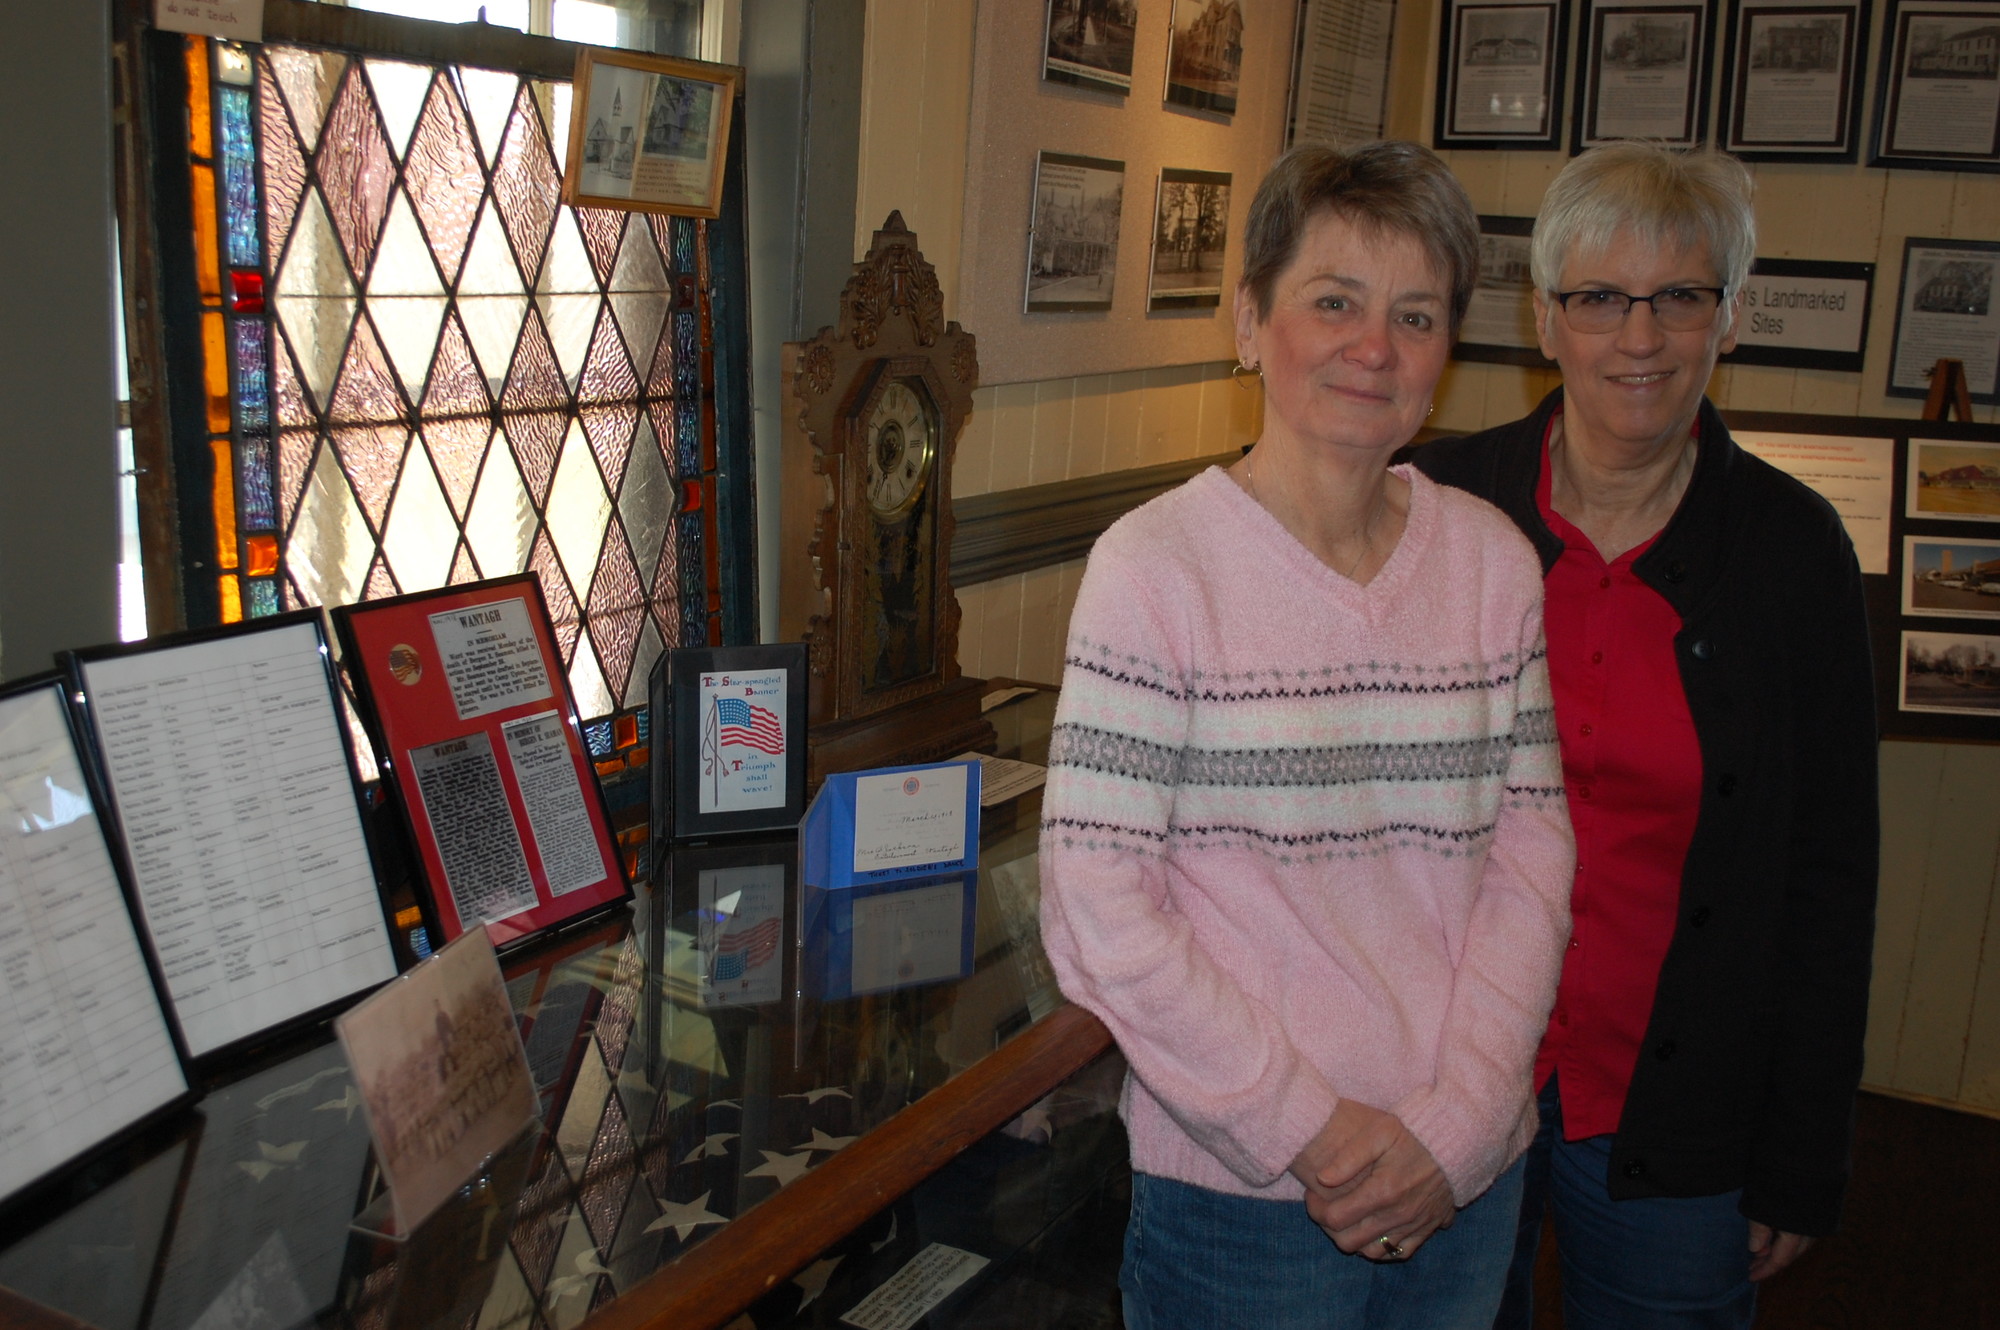 Claire Reisert, left, and Carol Poulos are among the volunteers from the Wantagh Preservation Society who give tours of the local history museum